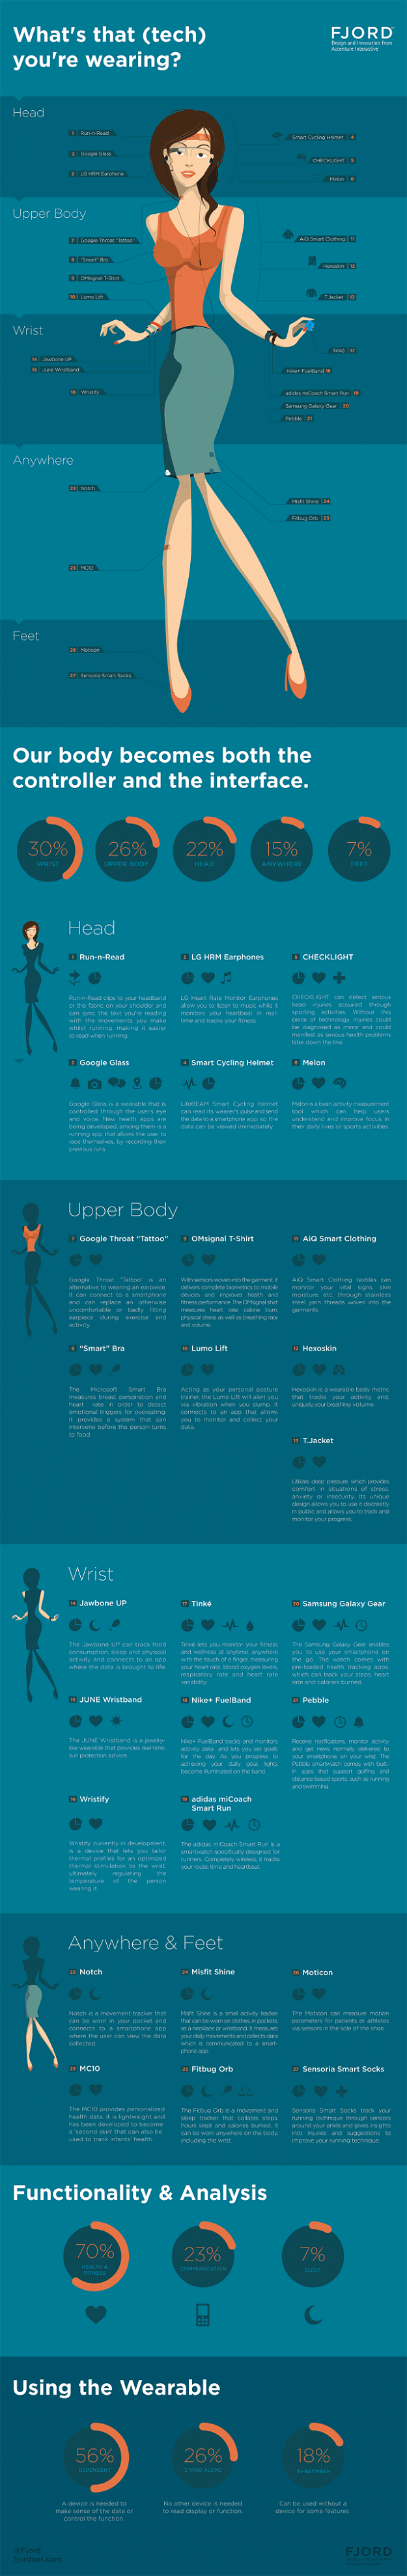 Wearable Tech Infographic: Head to Toe